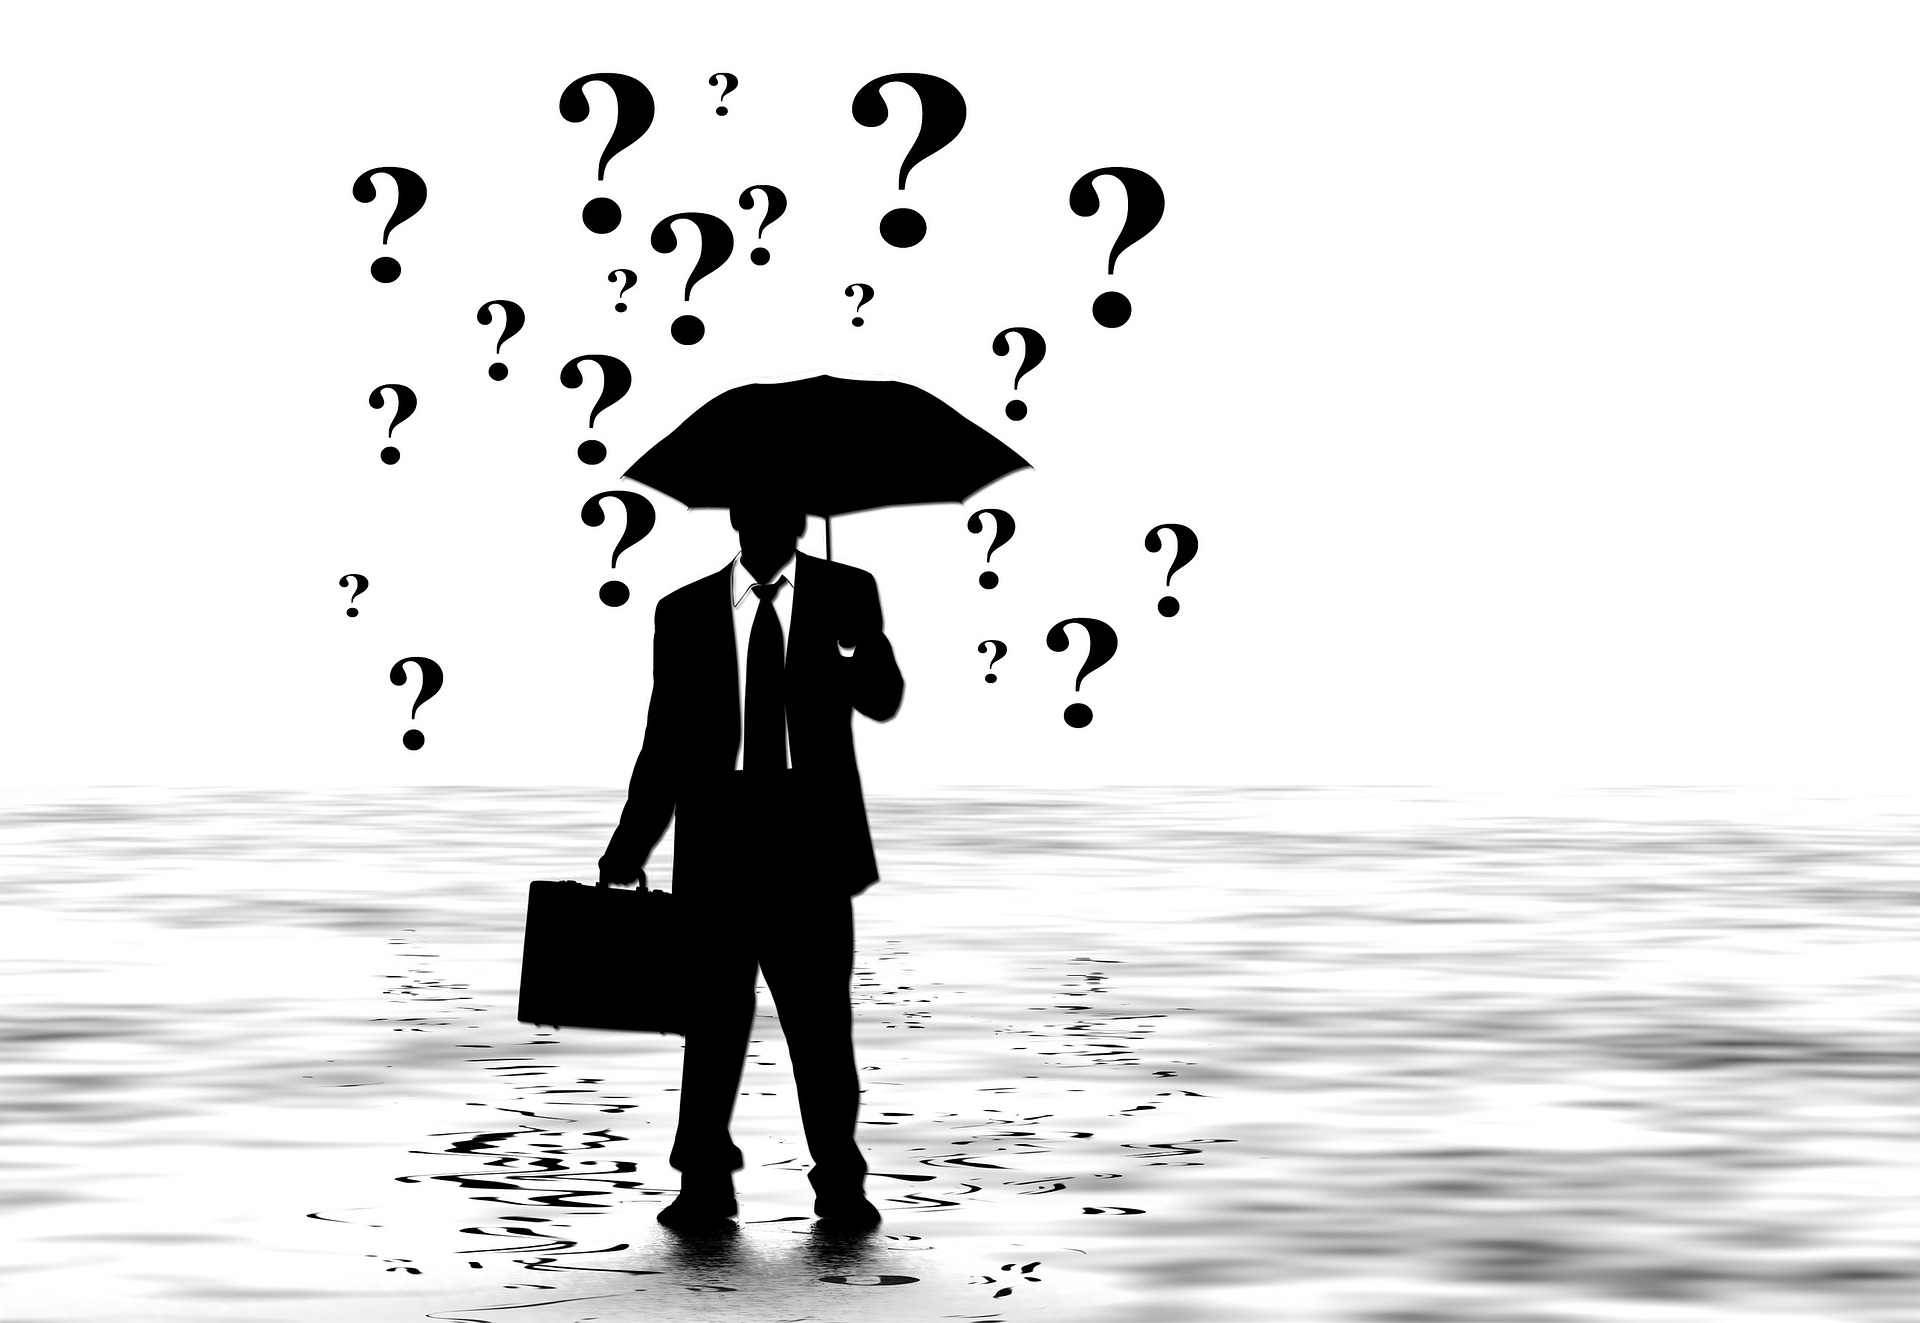 A person using an umbrella with question marks in the background